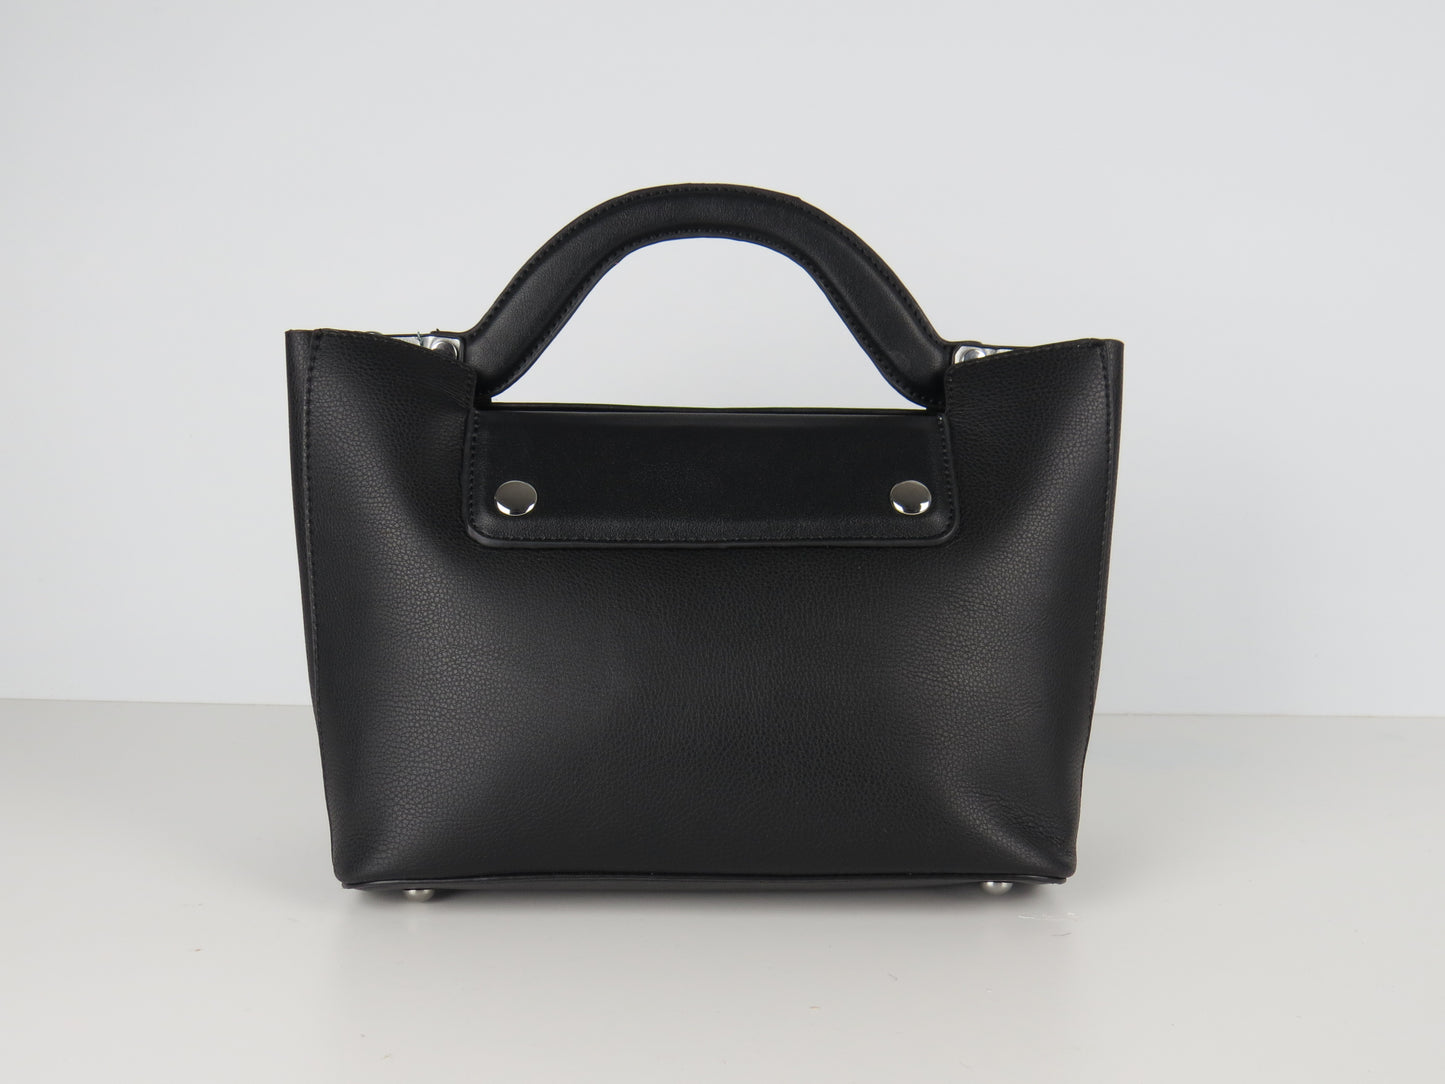 Black Faux Leather Structured Handbag With Extra Long Strap